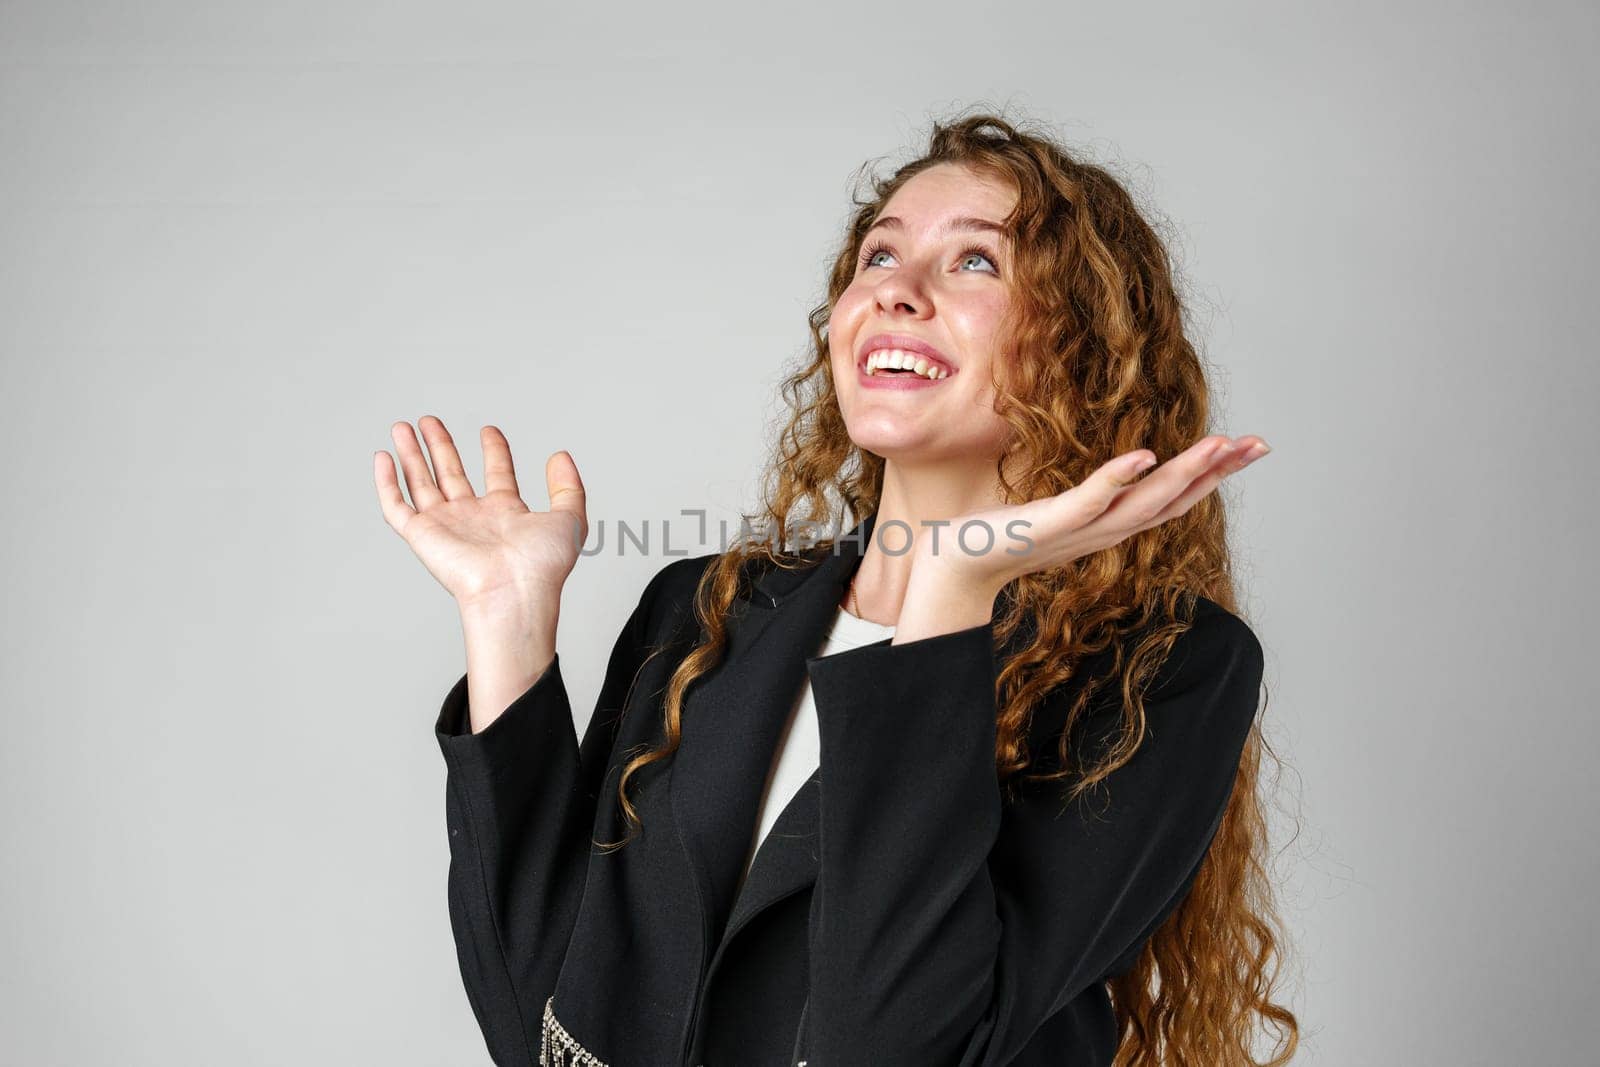 Young Businesswoman Gesturing Excitement or Surprise Against a Neutral Background by Fabrikasimf